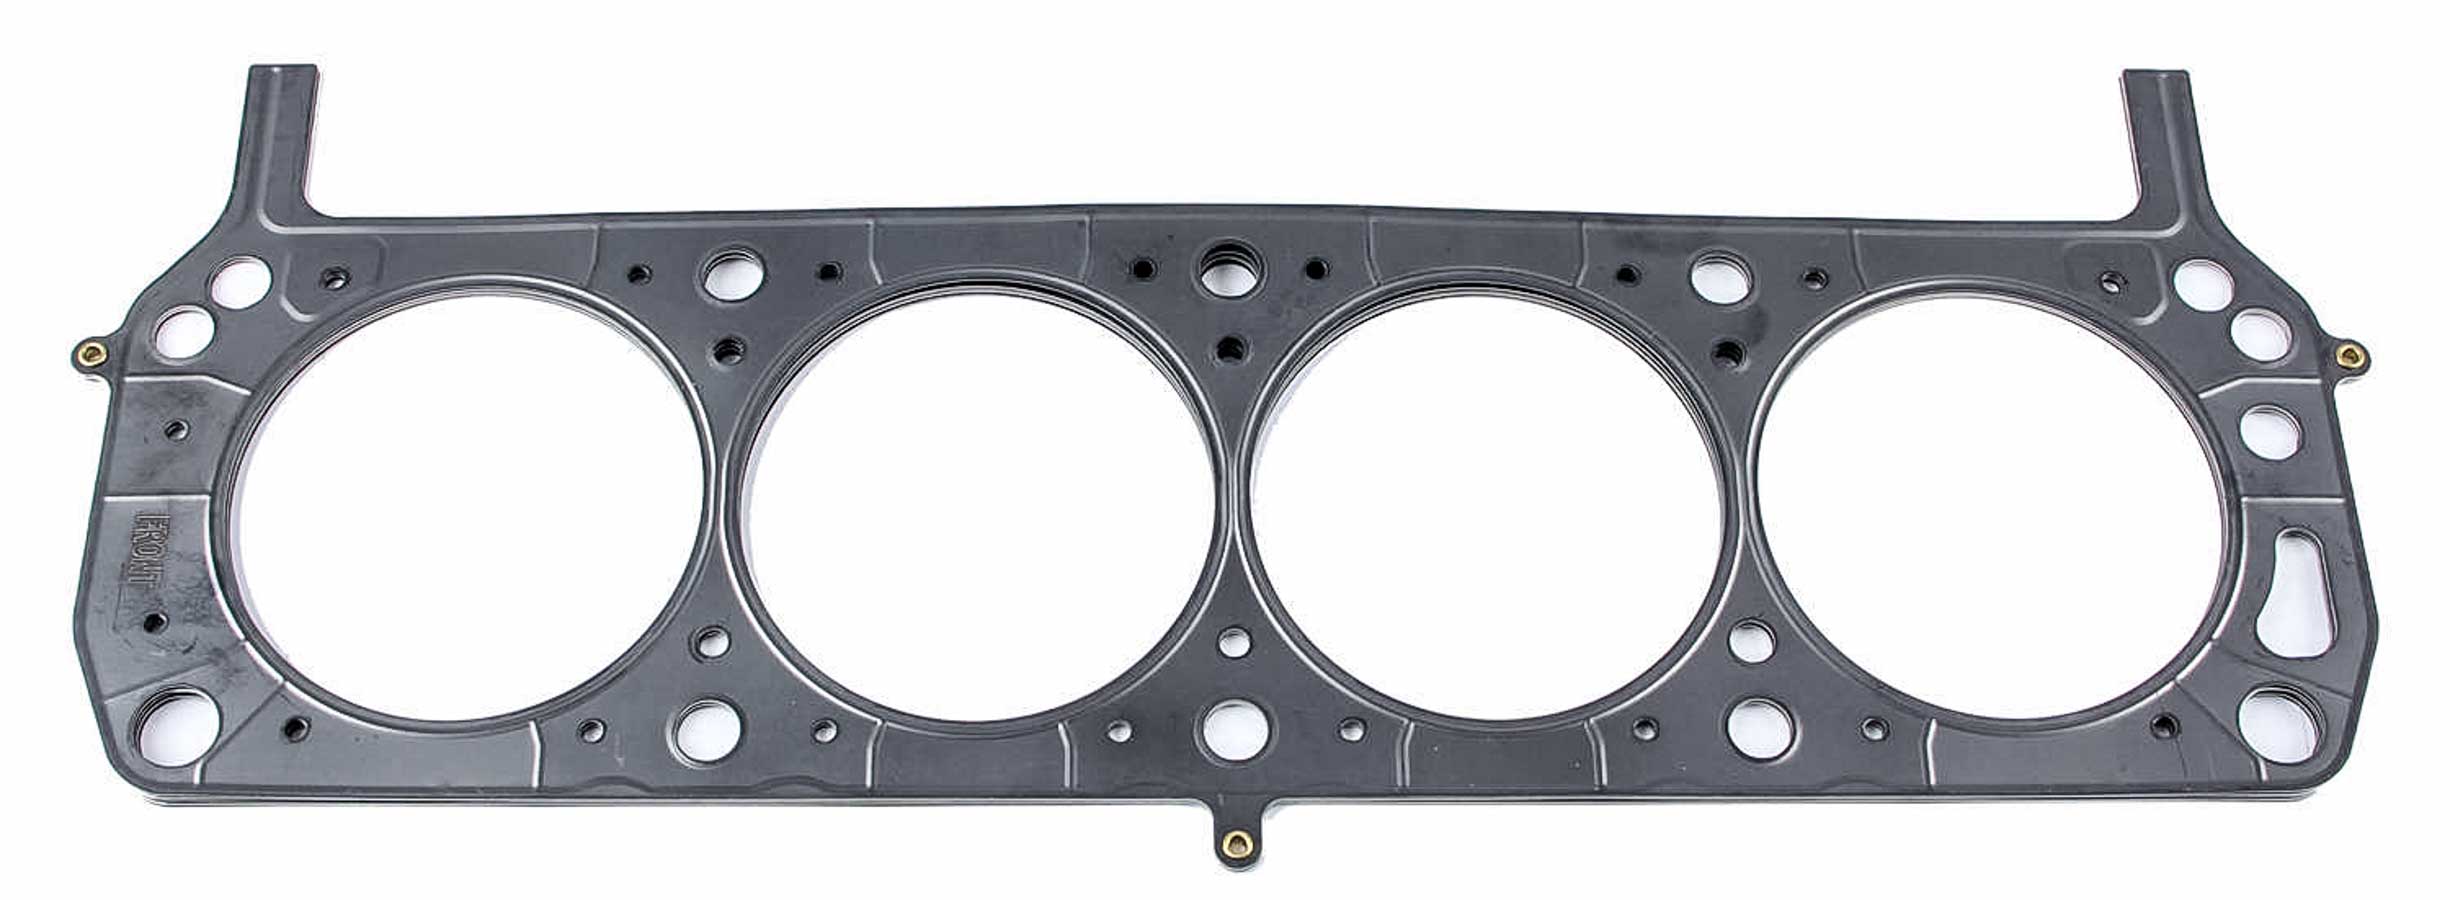 Cometic Gasket C5403-051 MLS .051 Thickness 4.200 Head Gasket for Small Block Chevy Brodix 